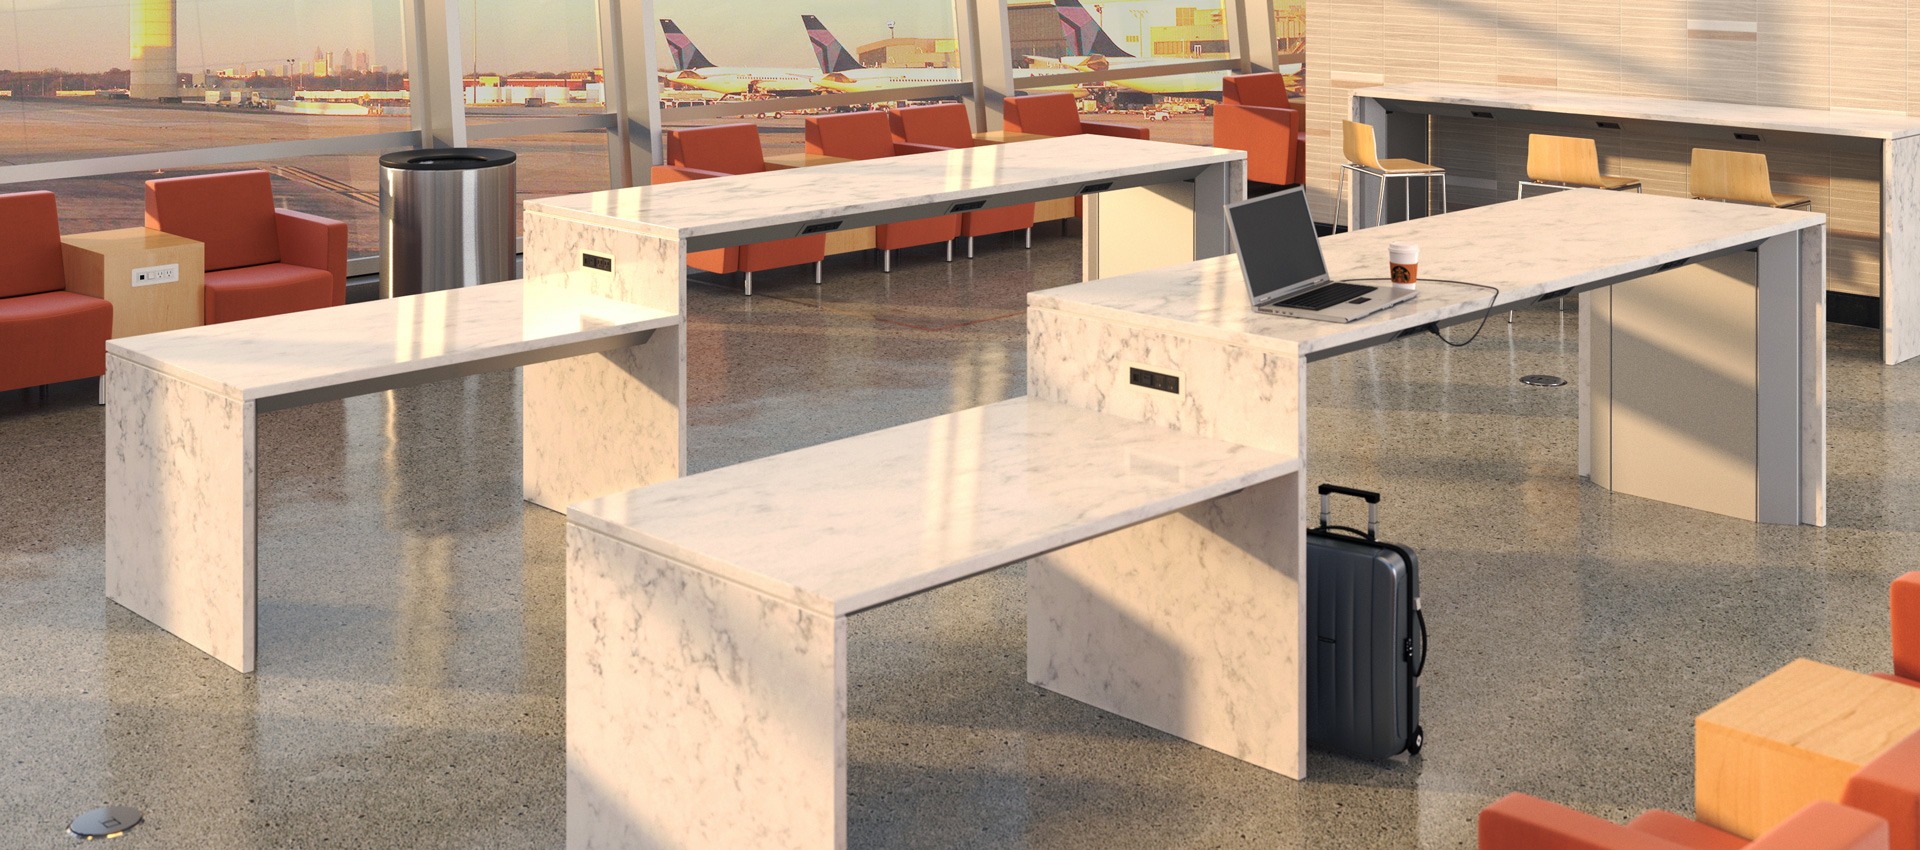 powerbar charging tables with white marble, ADA access and lounge seating in airport